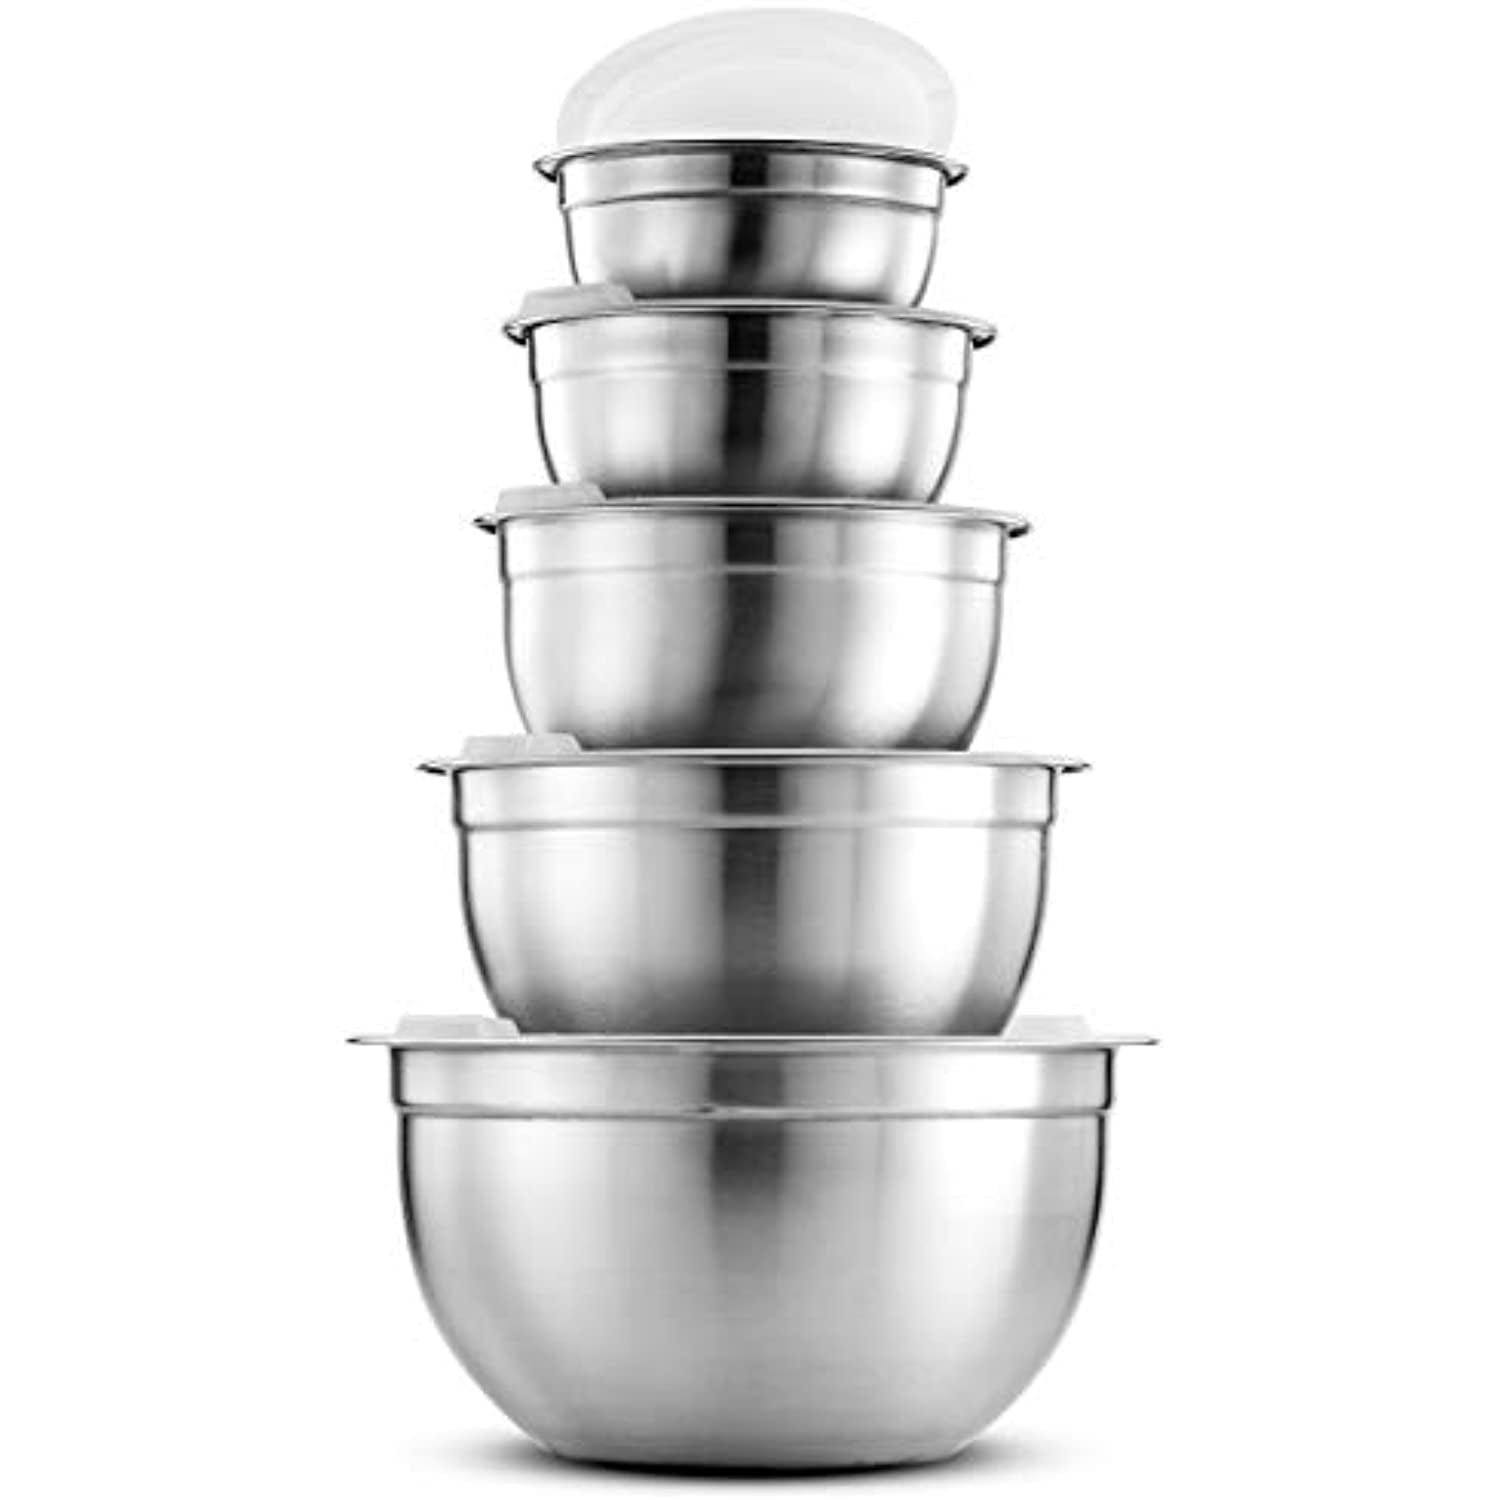 1.5 0.63 qt Non-Slip Silicone Bottom & Measuring Marks 2 Fit for Mixing & Serving（Gray） 3 5 20pcs Stainless Steel Nesting Bowls Set by Paincco Mixing Bowls with Airtight Lids 4 Size 6